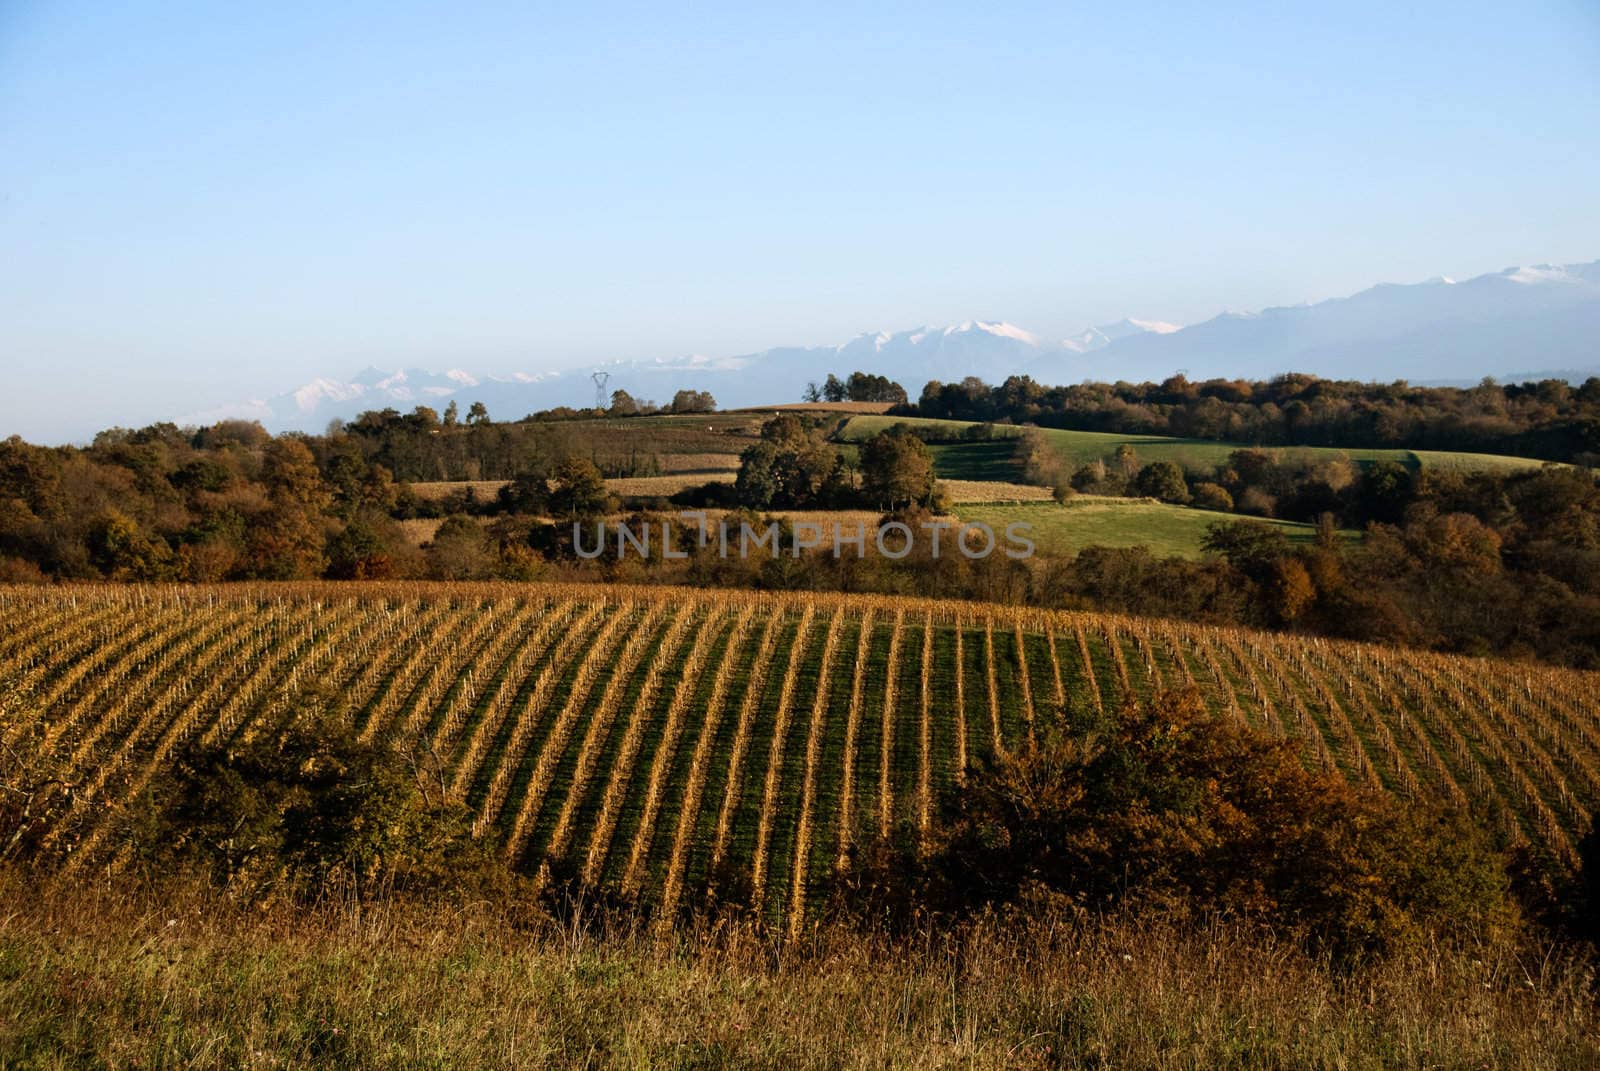 Vinyards thrive at the base of the Pyrenees mountain range in Aquitaine France.